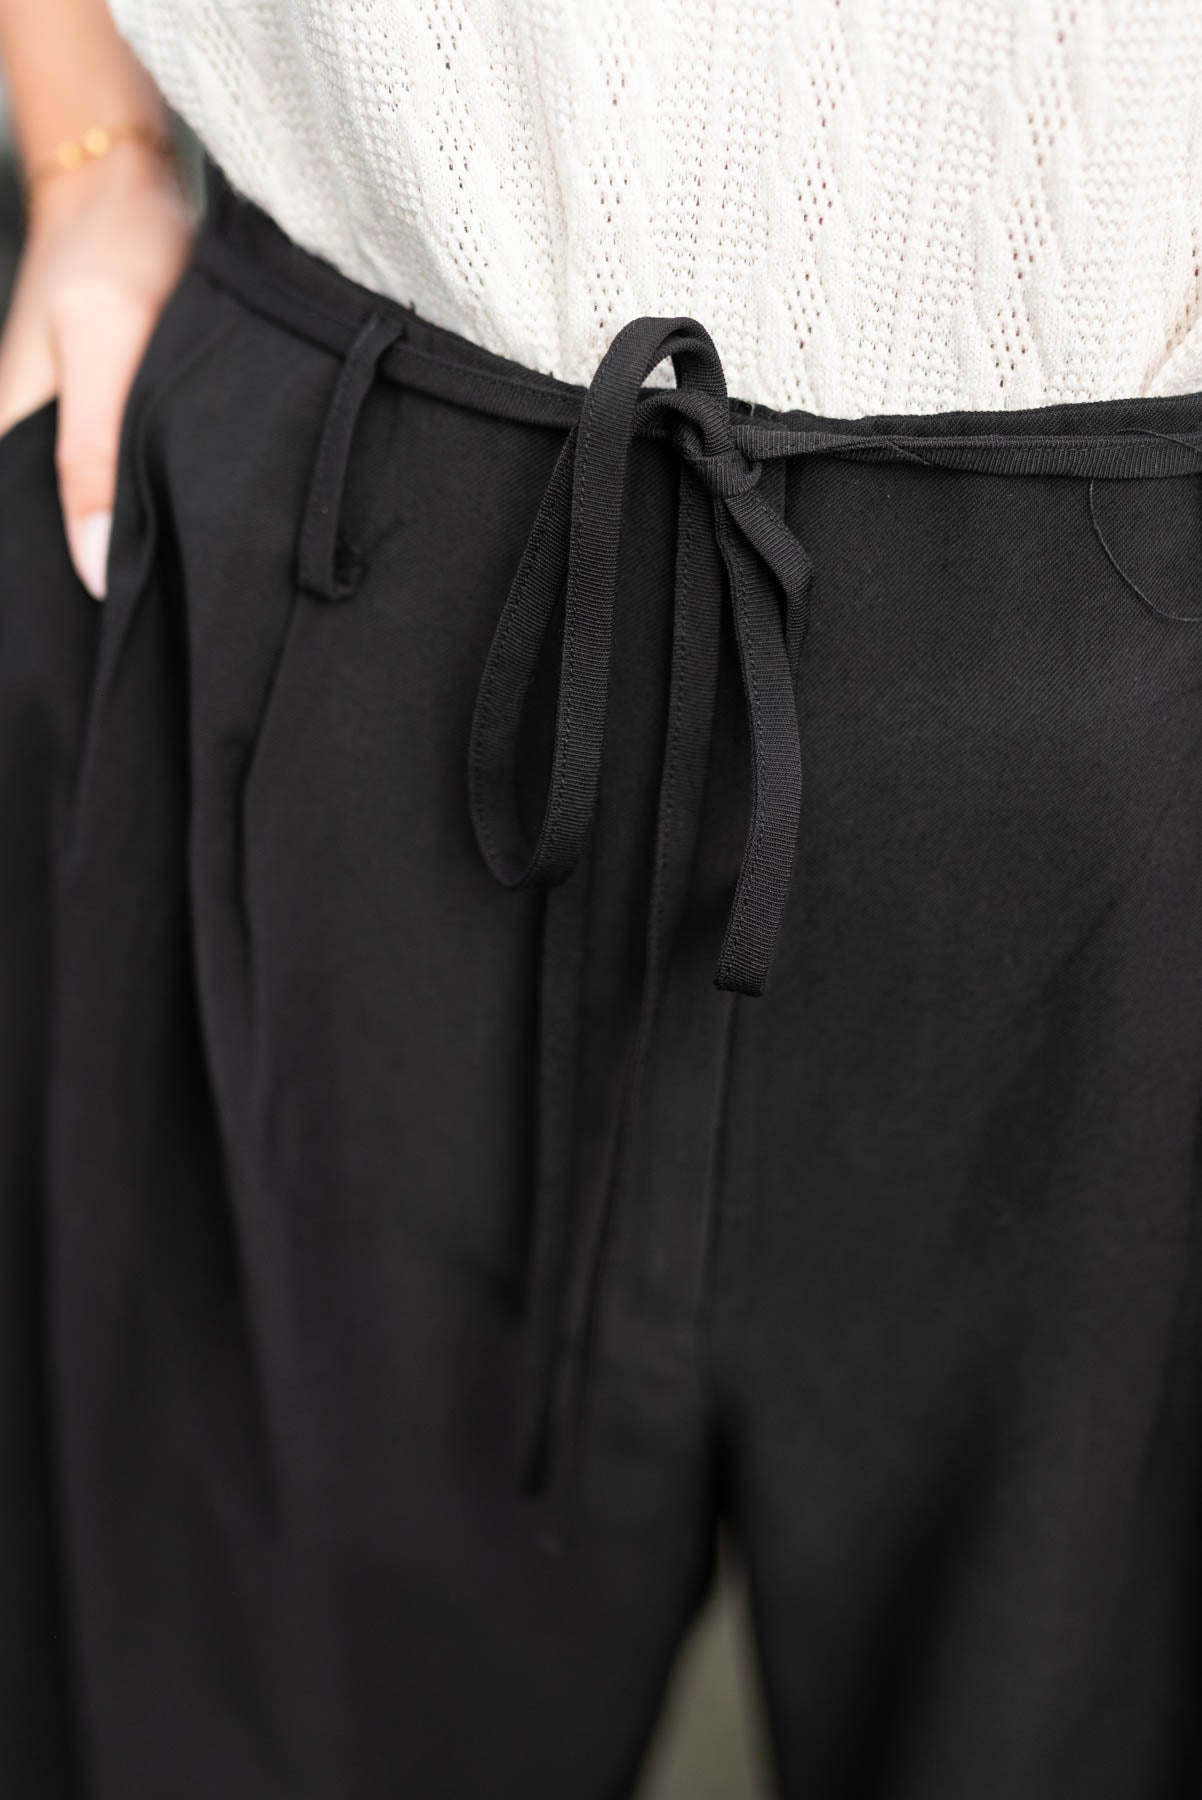 Black wide leg pants with pleats at the waist